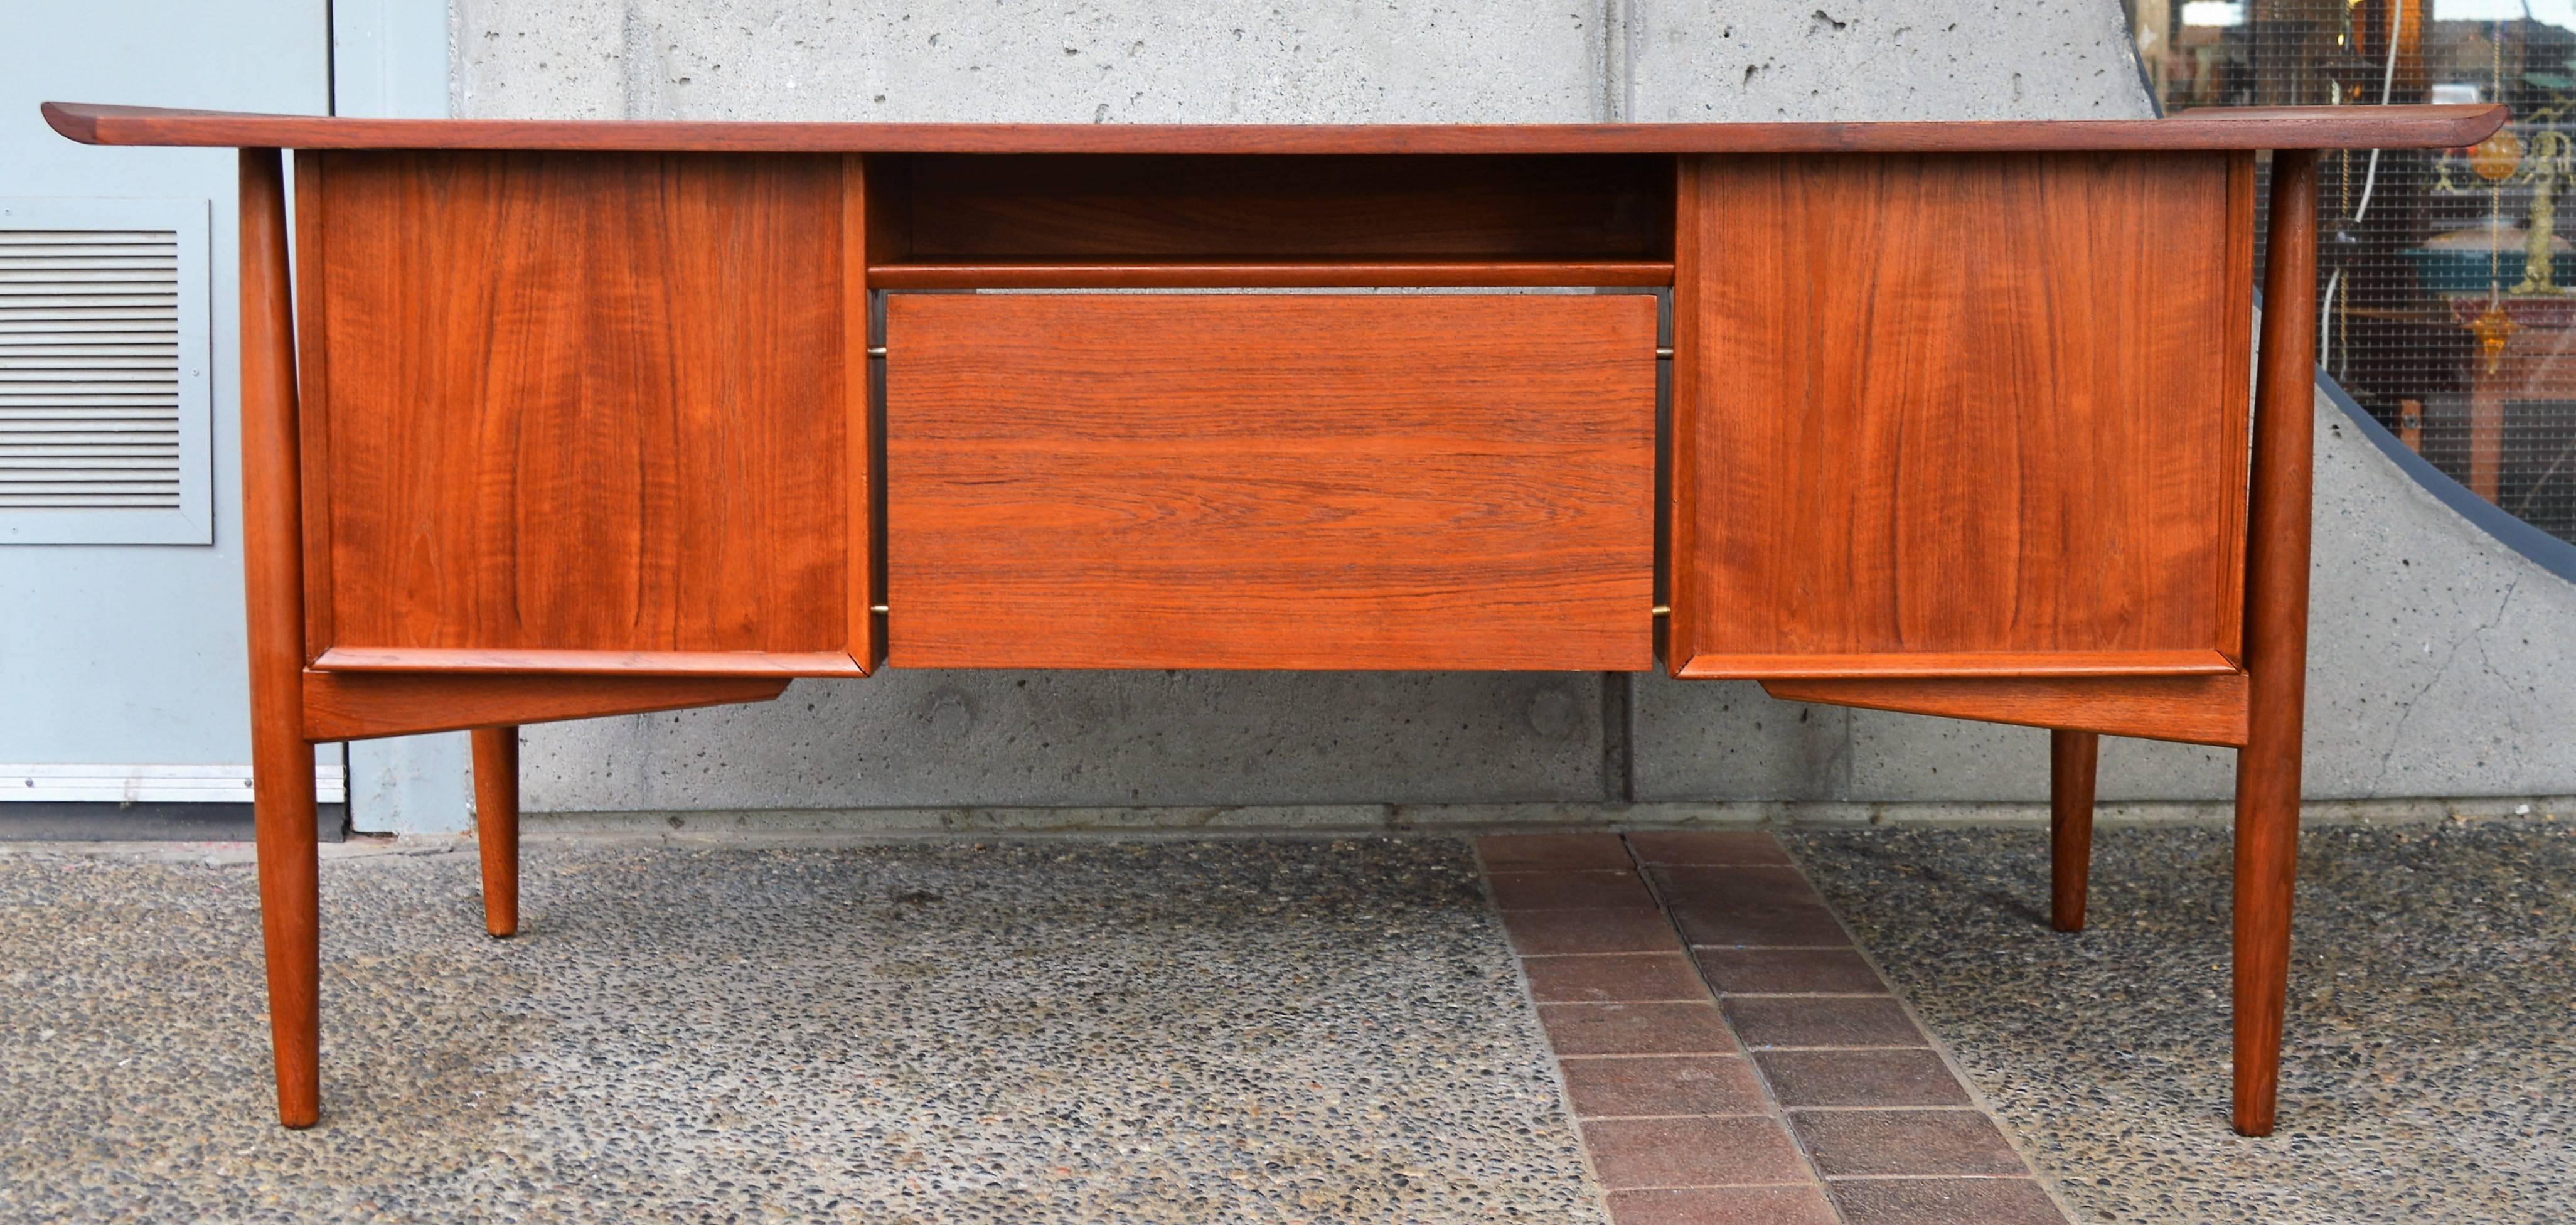 This stellar Danish modern quality teak desk was designed by Arne Vodder for H.P. Hansen in the 1960s. Note the beautifully flared ends on the top of the desk, the floating leg braces, the elongated drawer pulls, the floating back board on brass